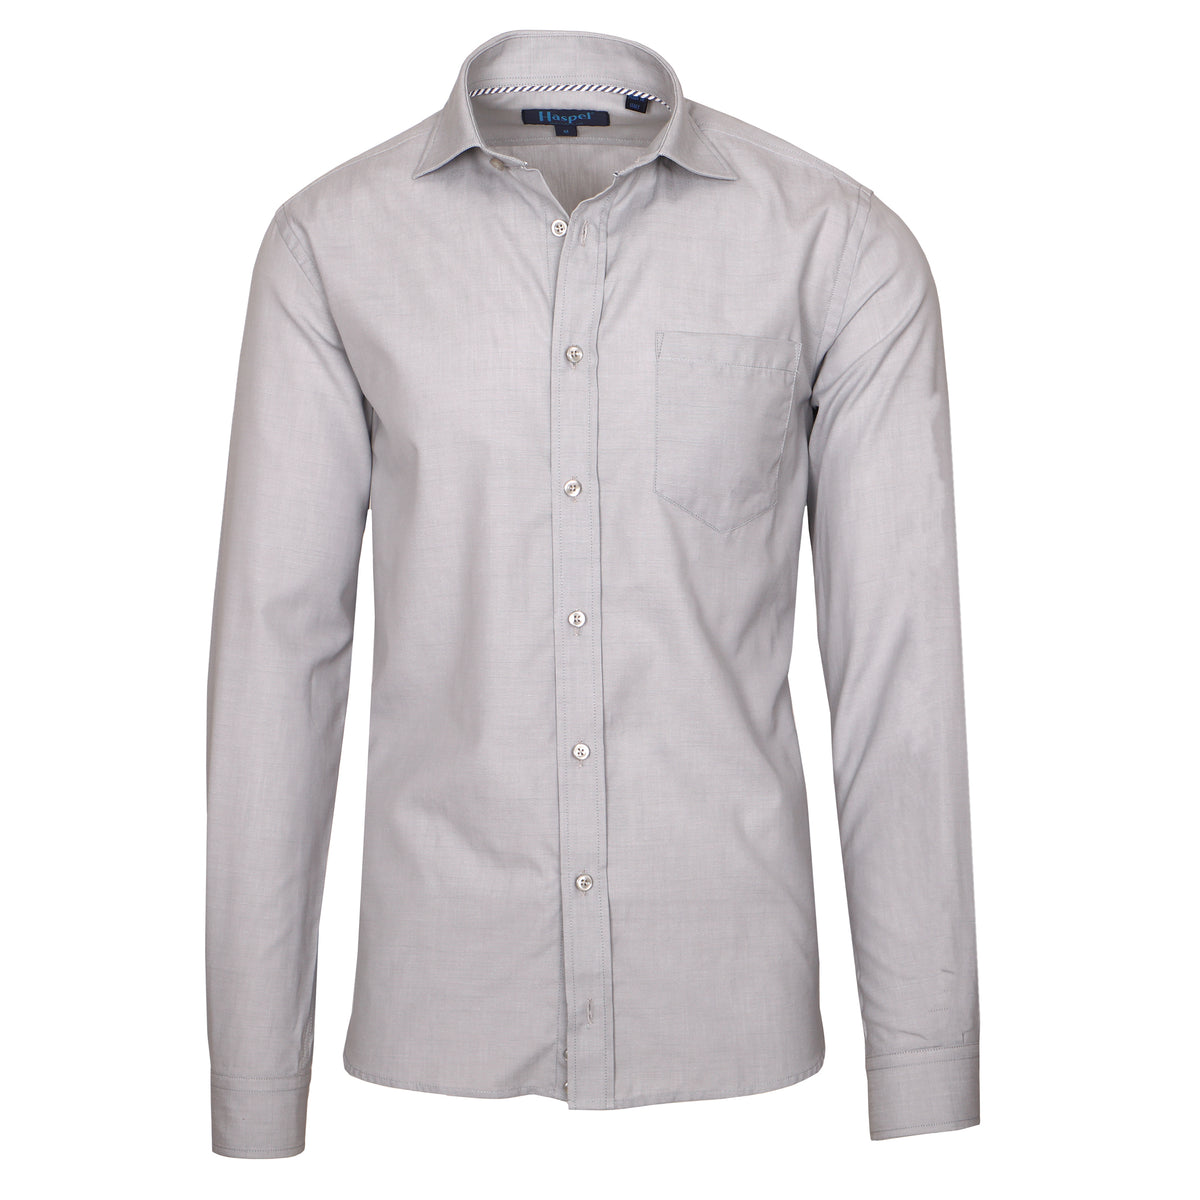 Neutral grey is anything but neutral in this shirt. Soft cotton and a neutral classic style.   100% Cotton  •  Long Sleeve  •  Spread Collar  •  Chest Pocket  •  Button Cuff  •  Machine Washable  •  Made in Italy Return Policy